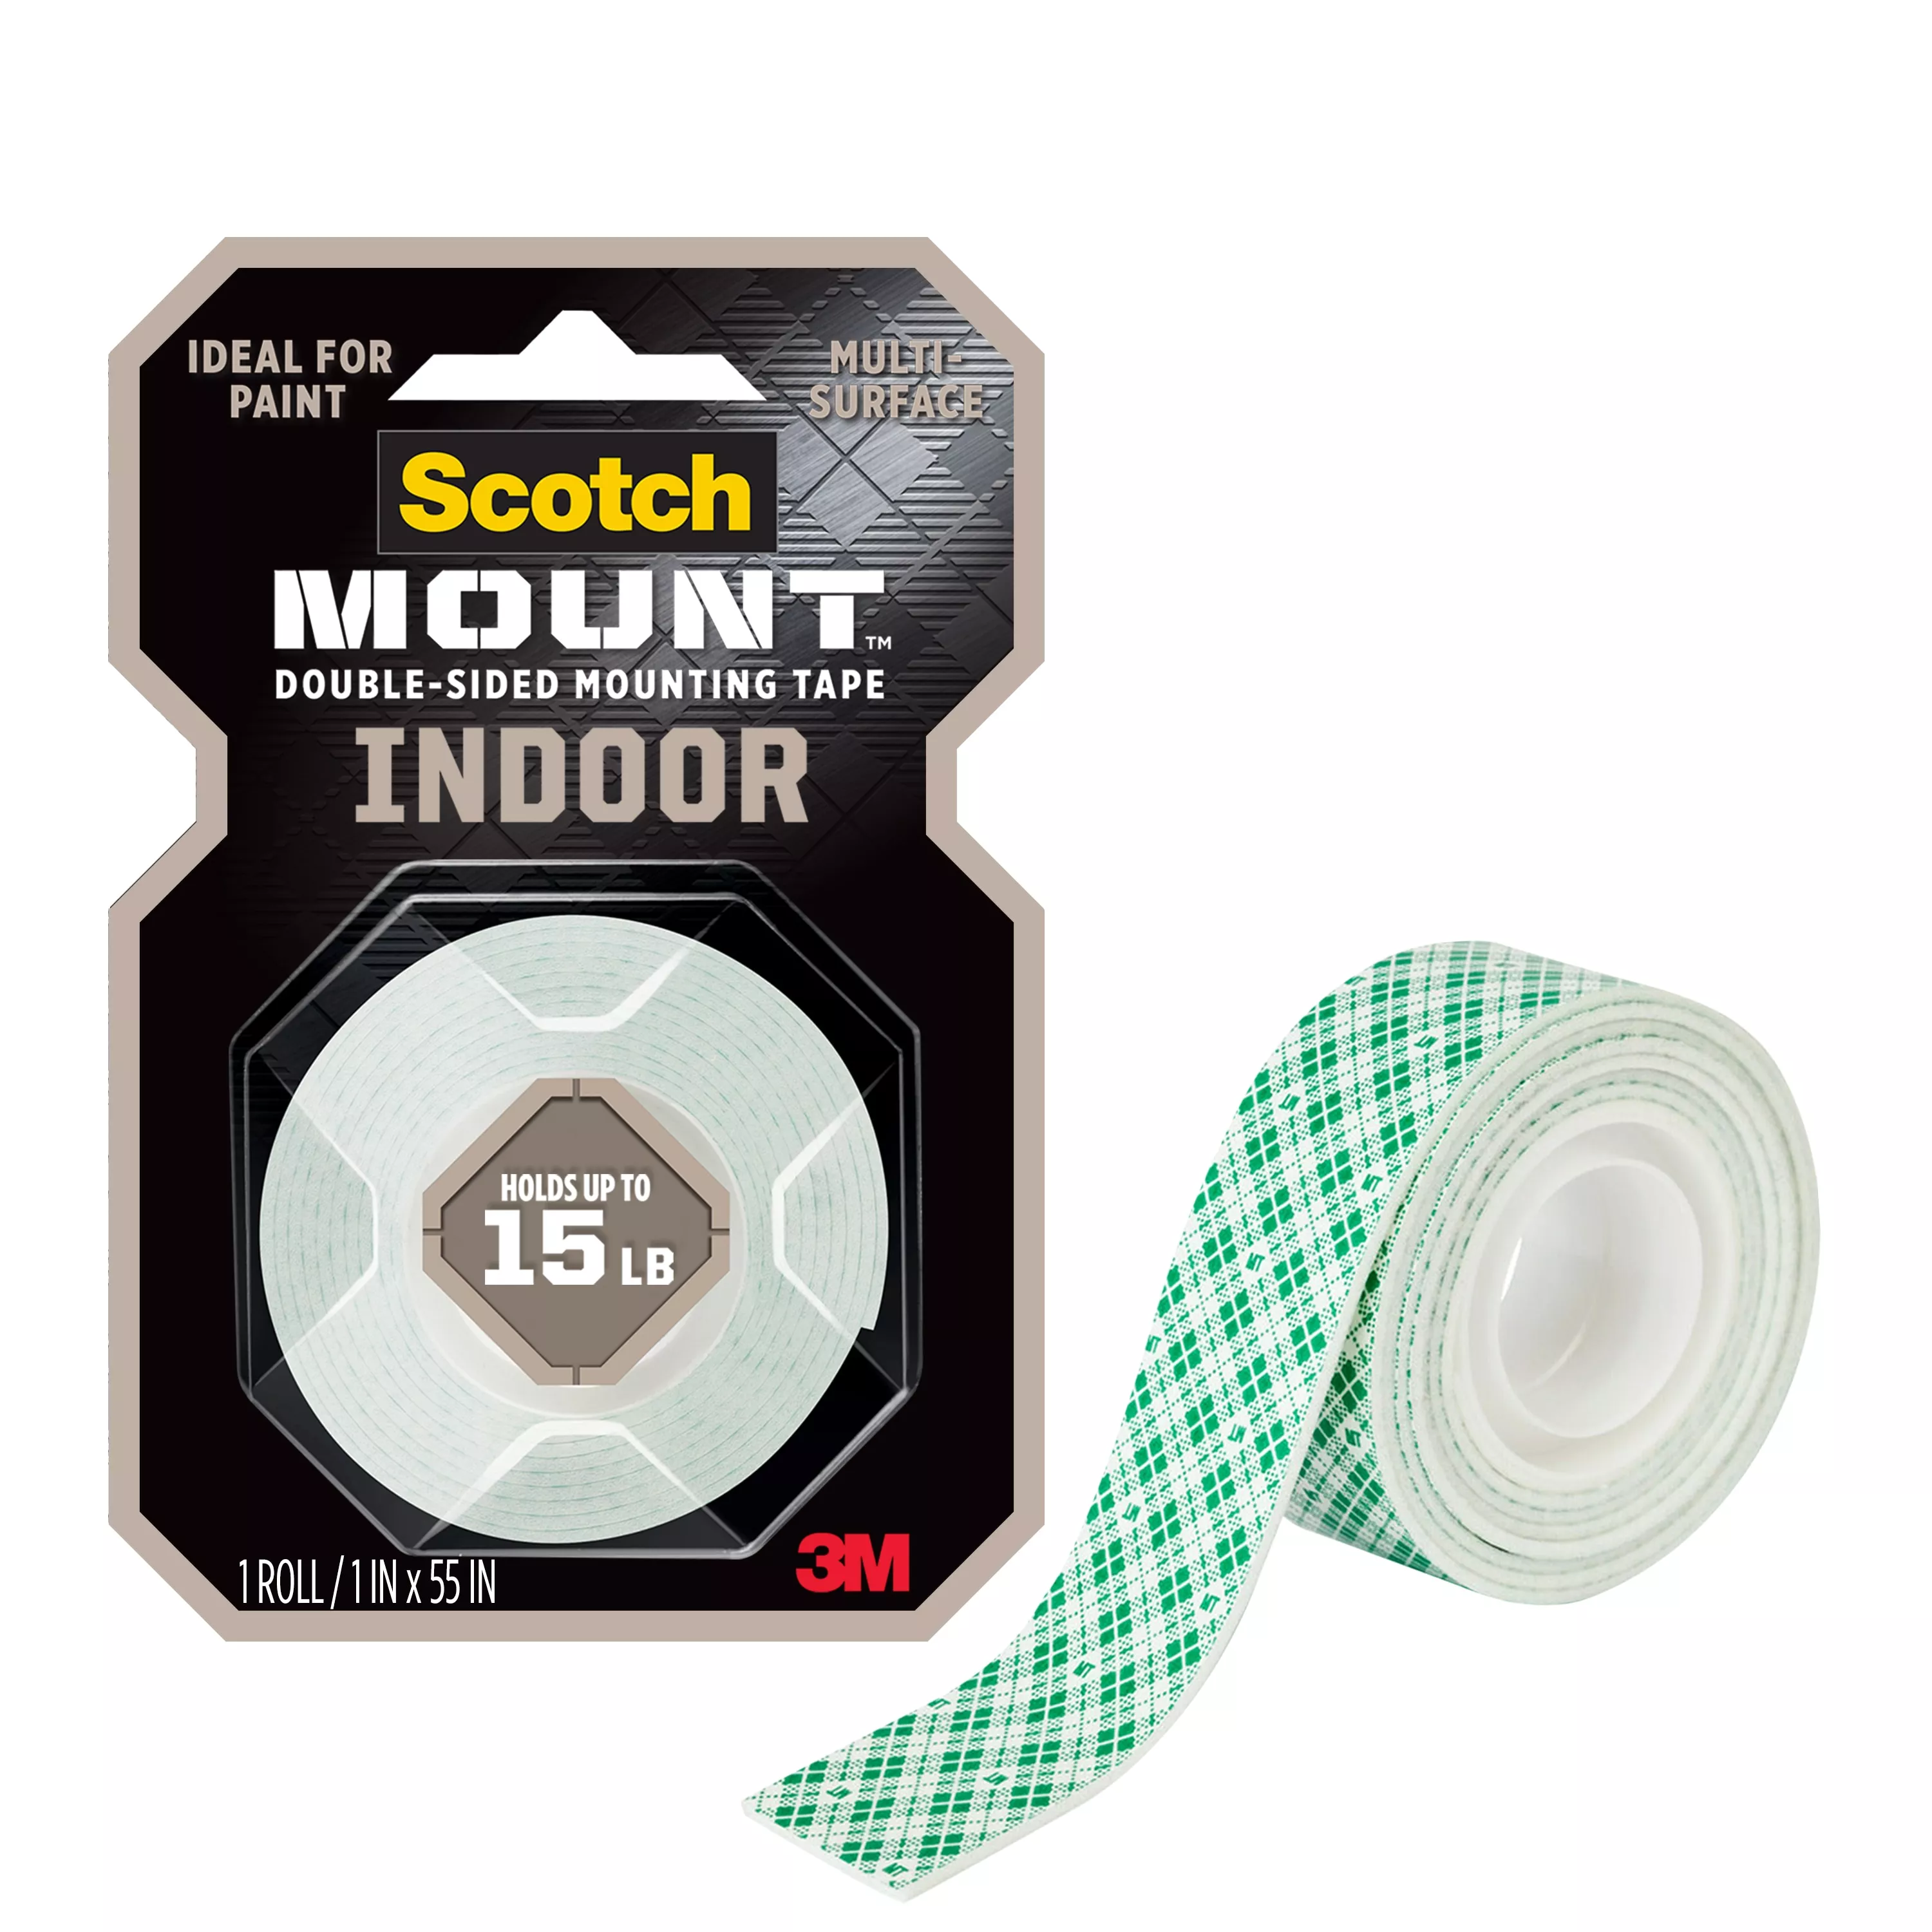 Scotch-Mount™ Indoor Double-Sided Mounting Tape 214H, 1 In X 55 In (2,54
Cm X 1,39 M)